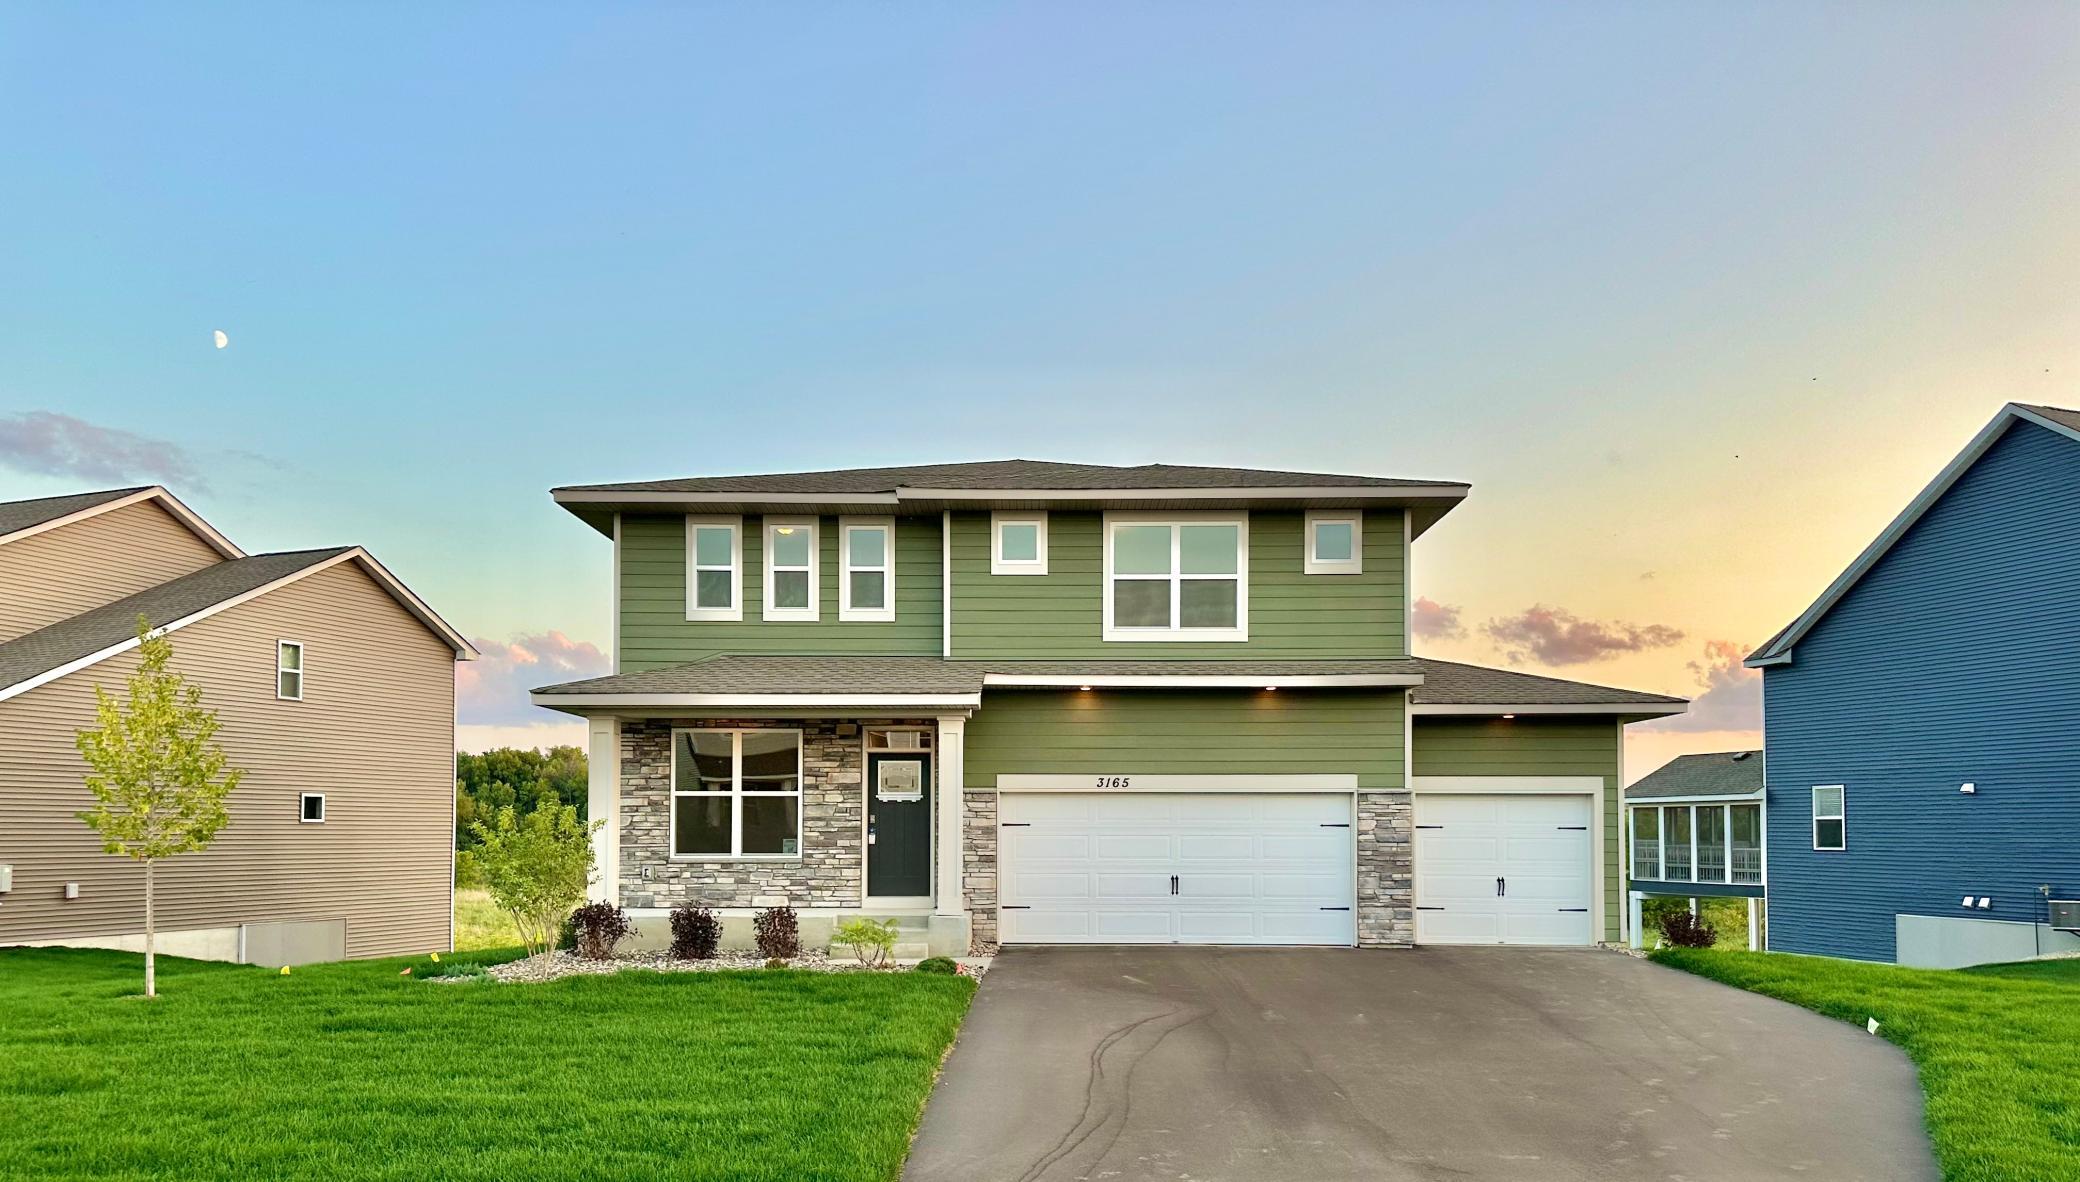 Welcome to 3165 Sunshine Curve! This Bridgewater home sits on a beautiful walk-out homesite backing up to wetlands. Home comes included with full sodded yard, Smart irrigation and landscaping! Ready to move-in and call home now!